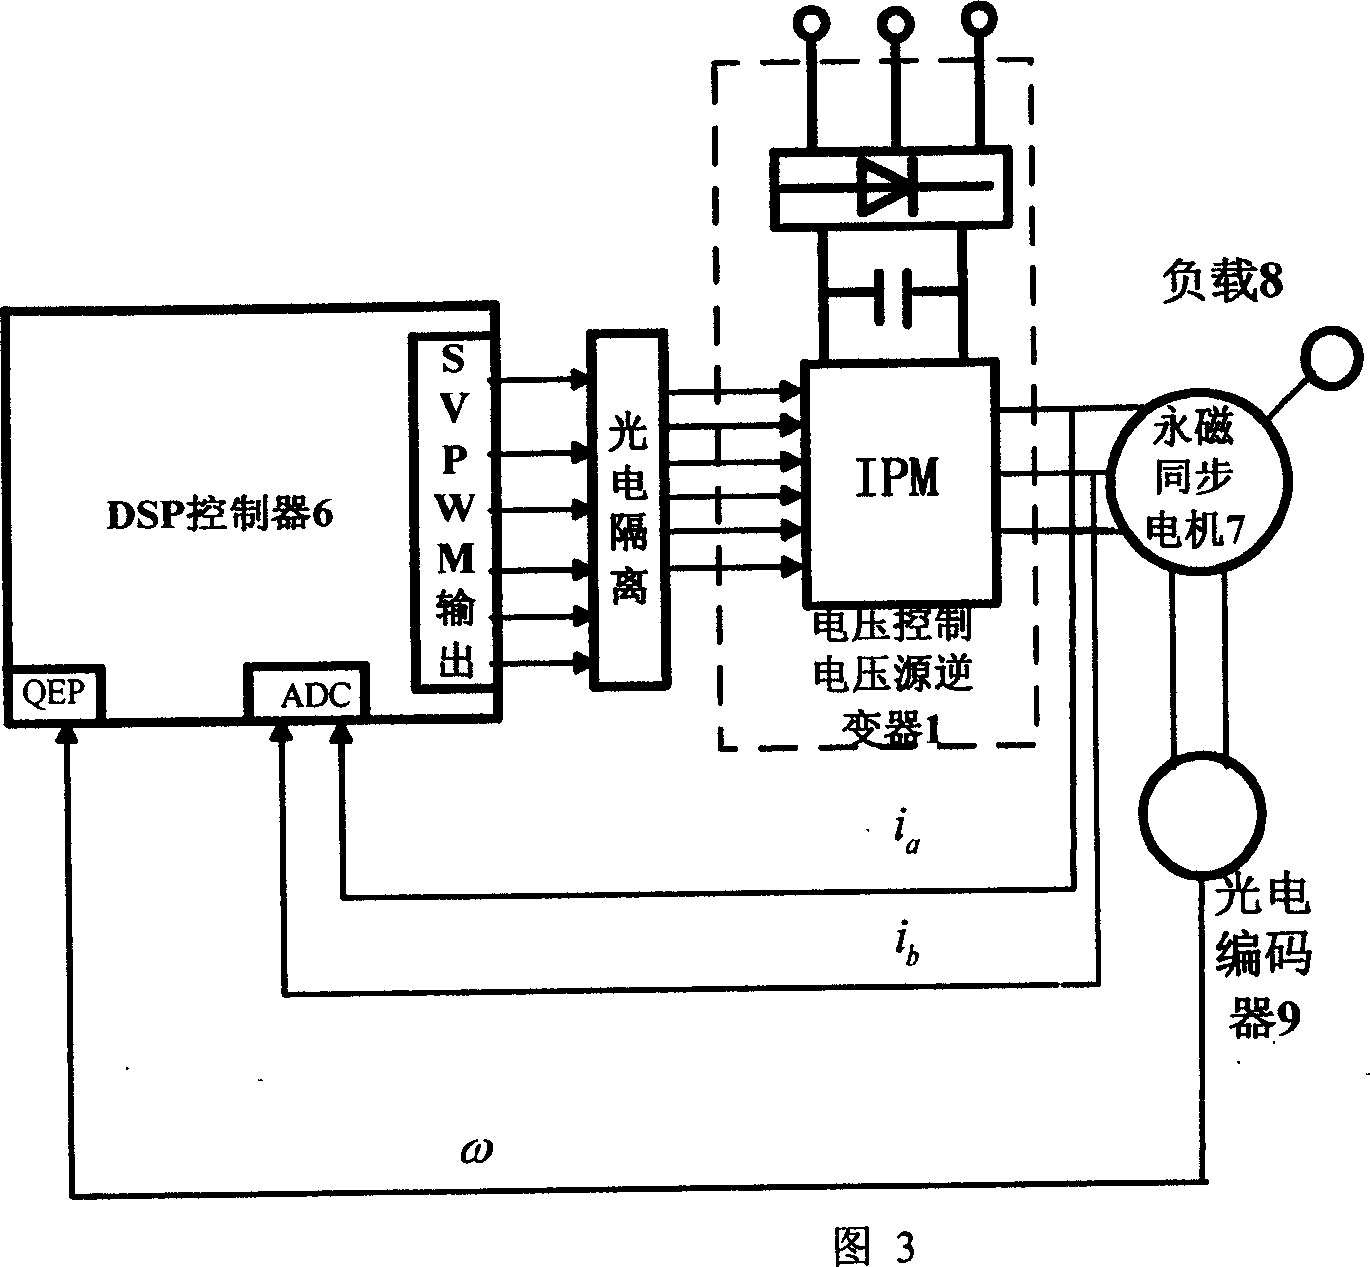 Method for building simplified self interference rejection controller of permanent magnet  synchronous machine